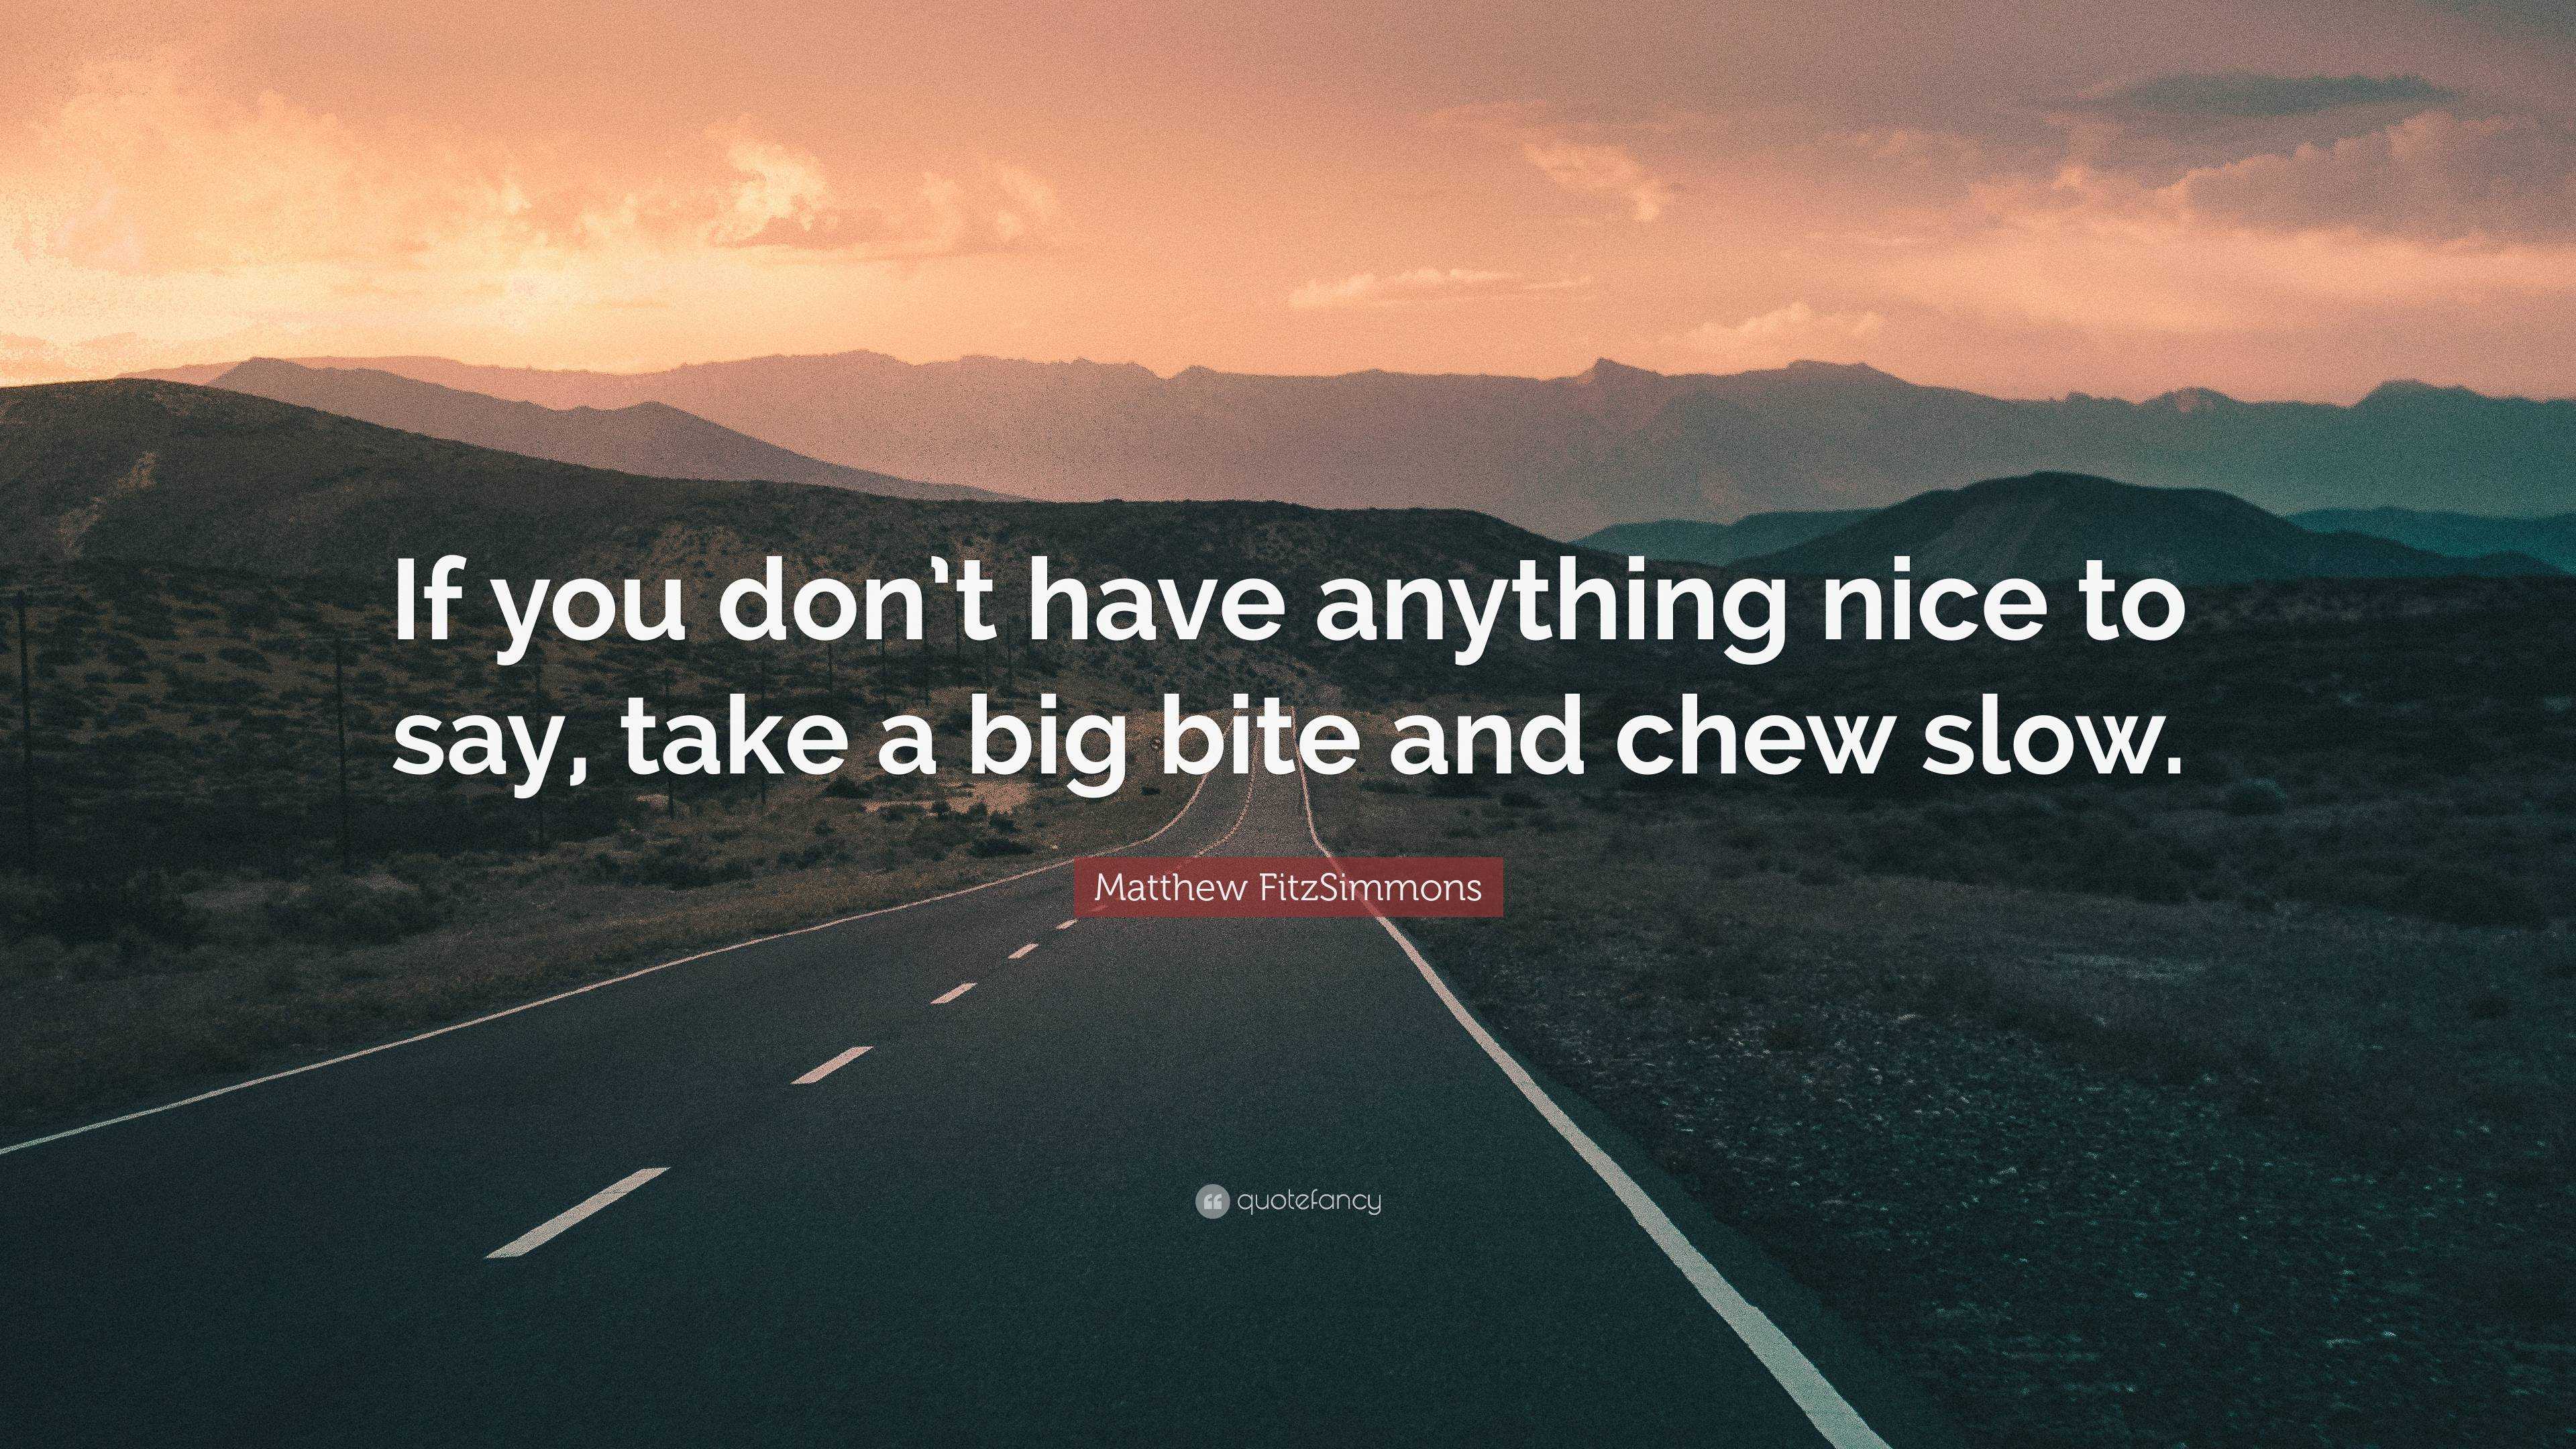 Matthew FitzSimmons Quote: “If you don't have anything nice to say, take a  big bite